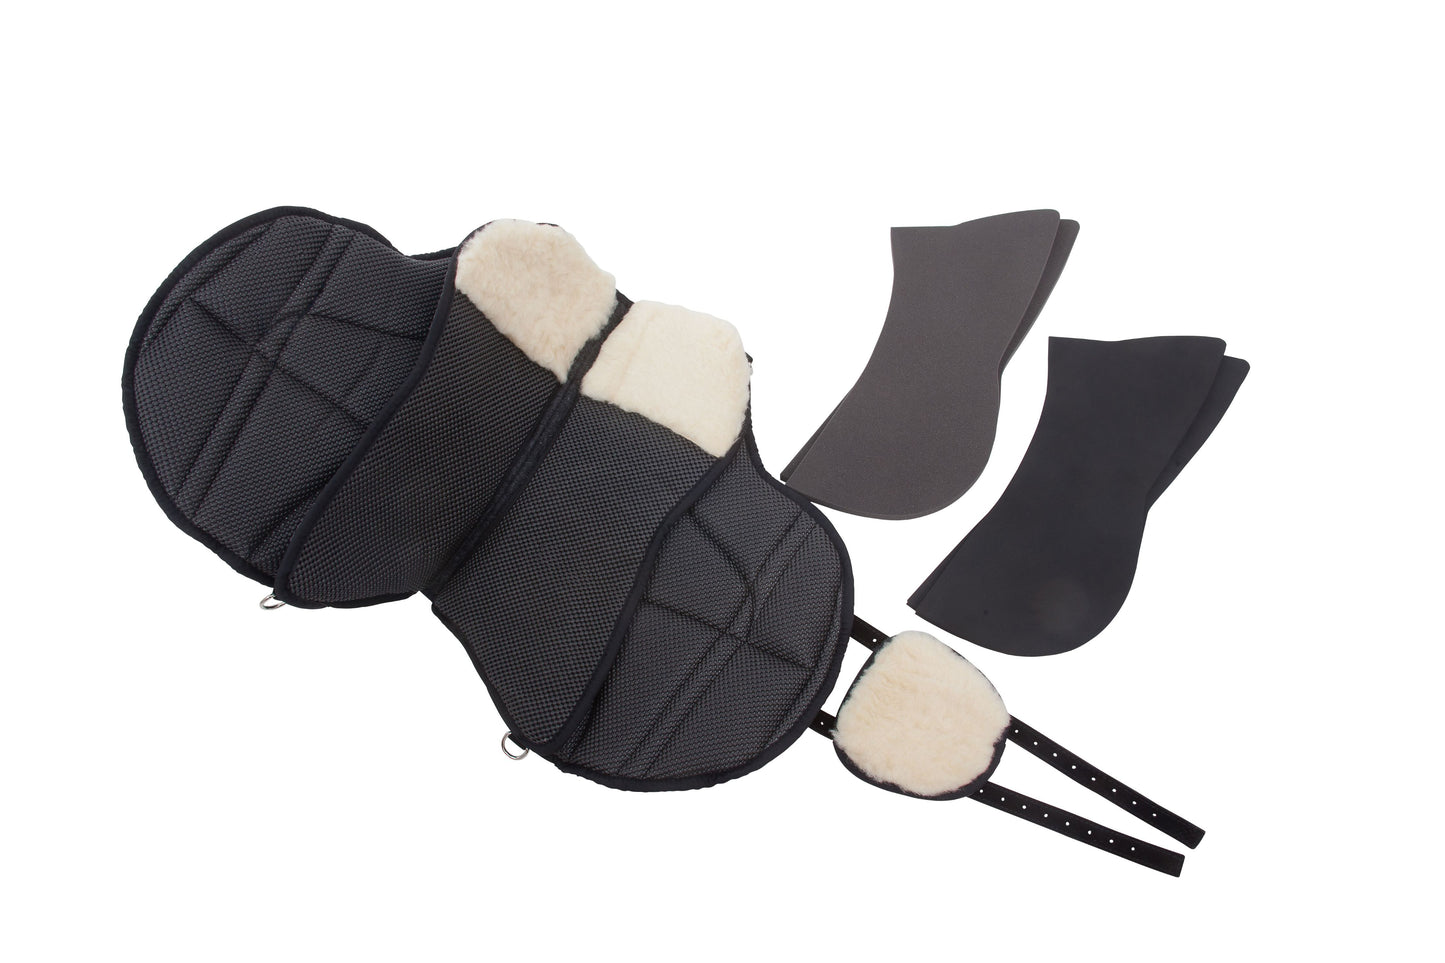 Barefoot® 'Ride-on-Pad' Physio - Available in Black or Brown